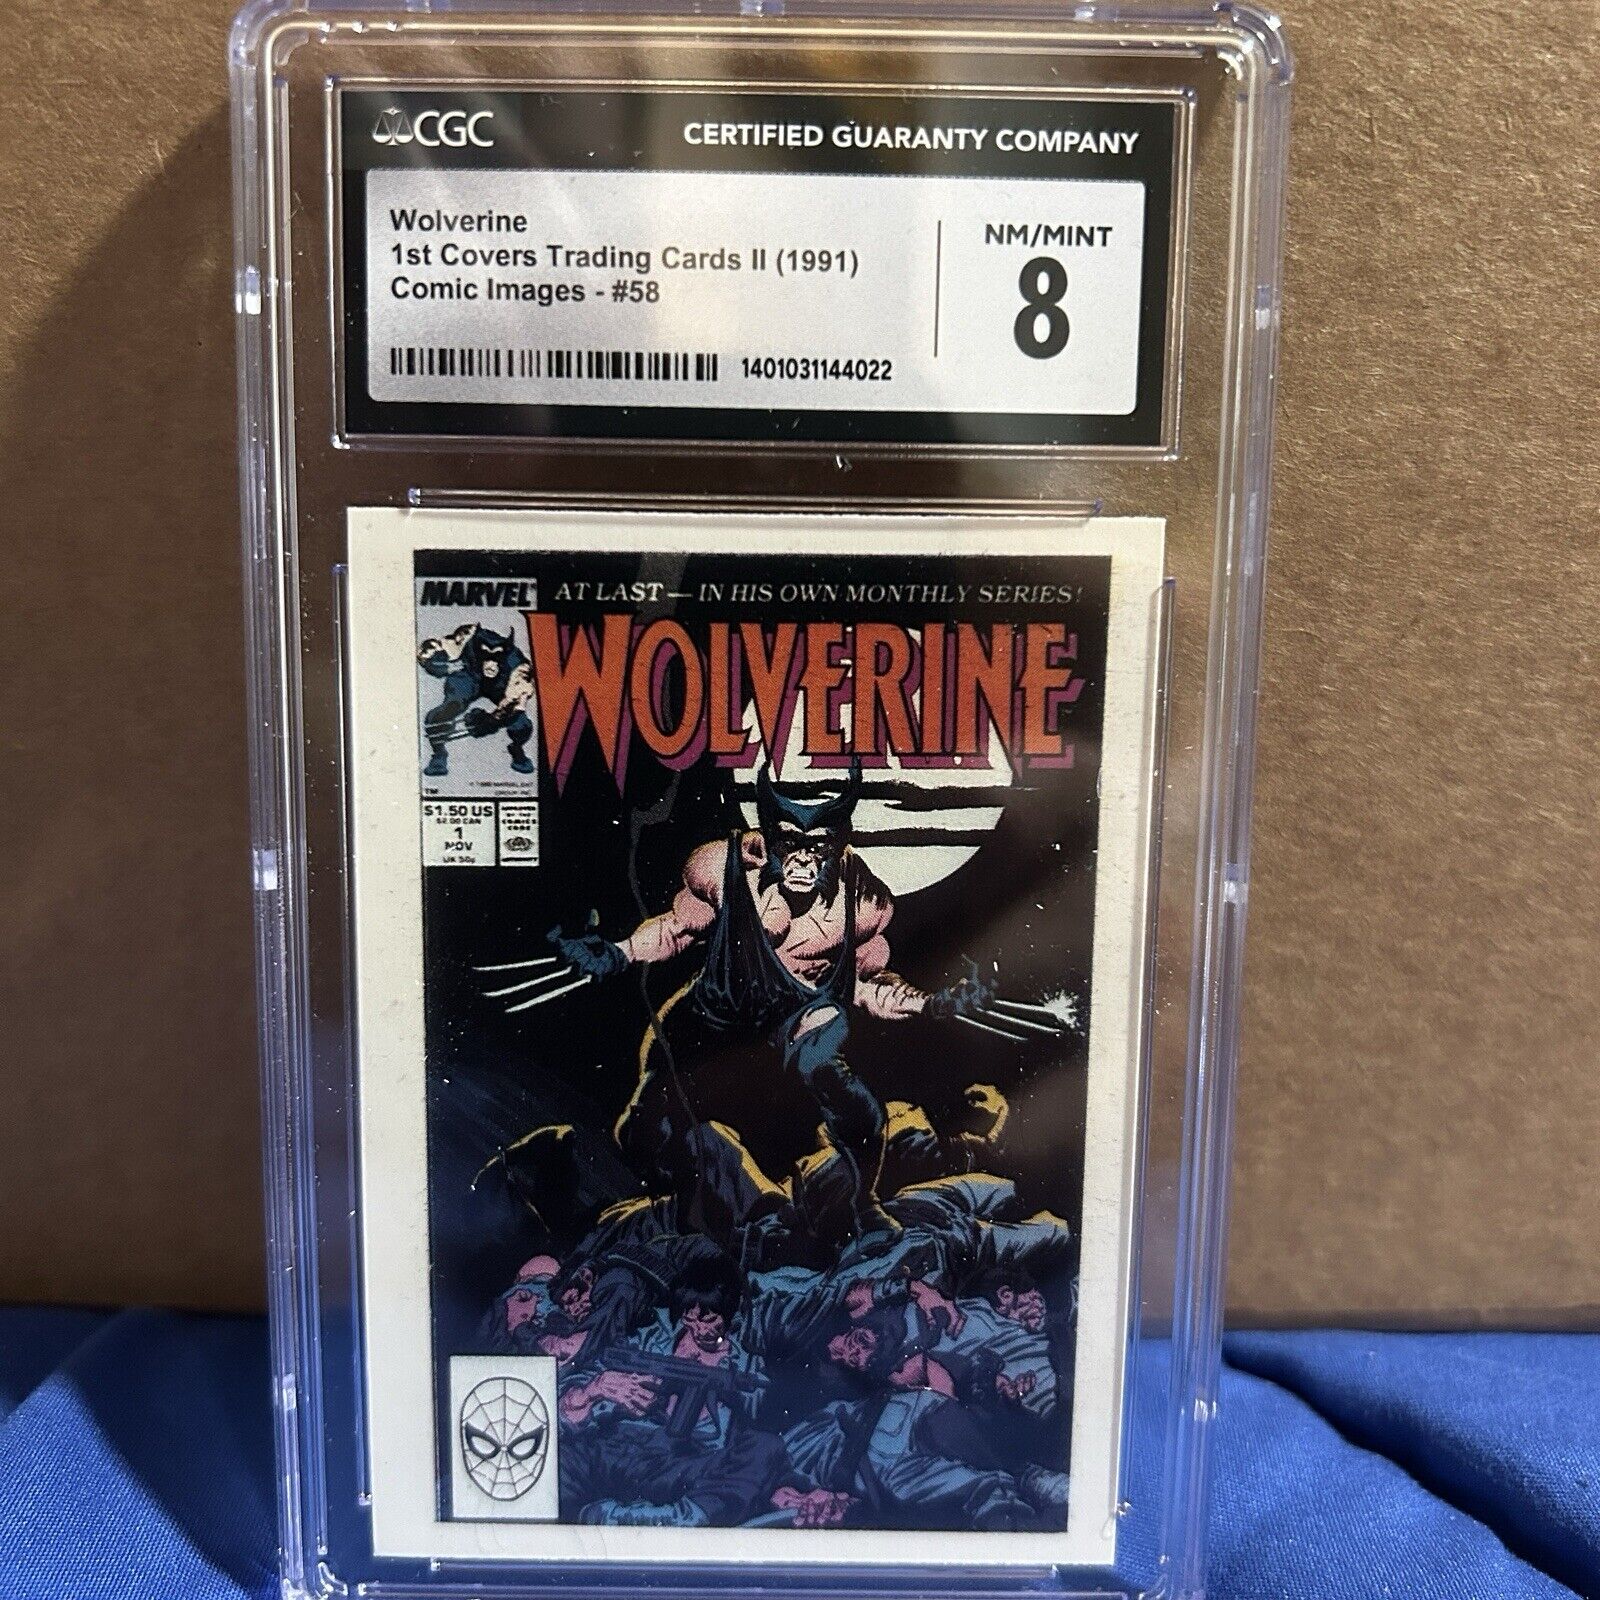 1991 Comic Images Marvel 1st Covers Series 2 Wolverine #58 CGC 8 